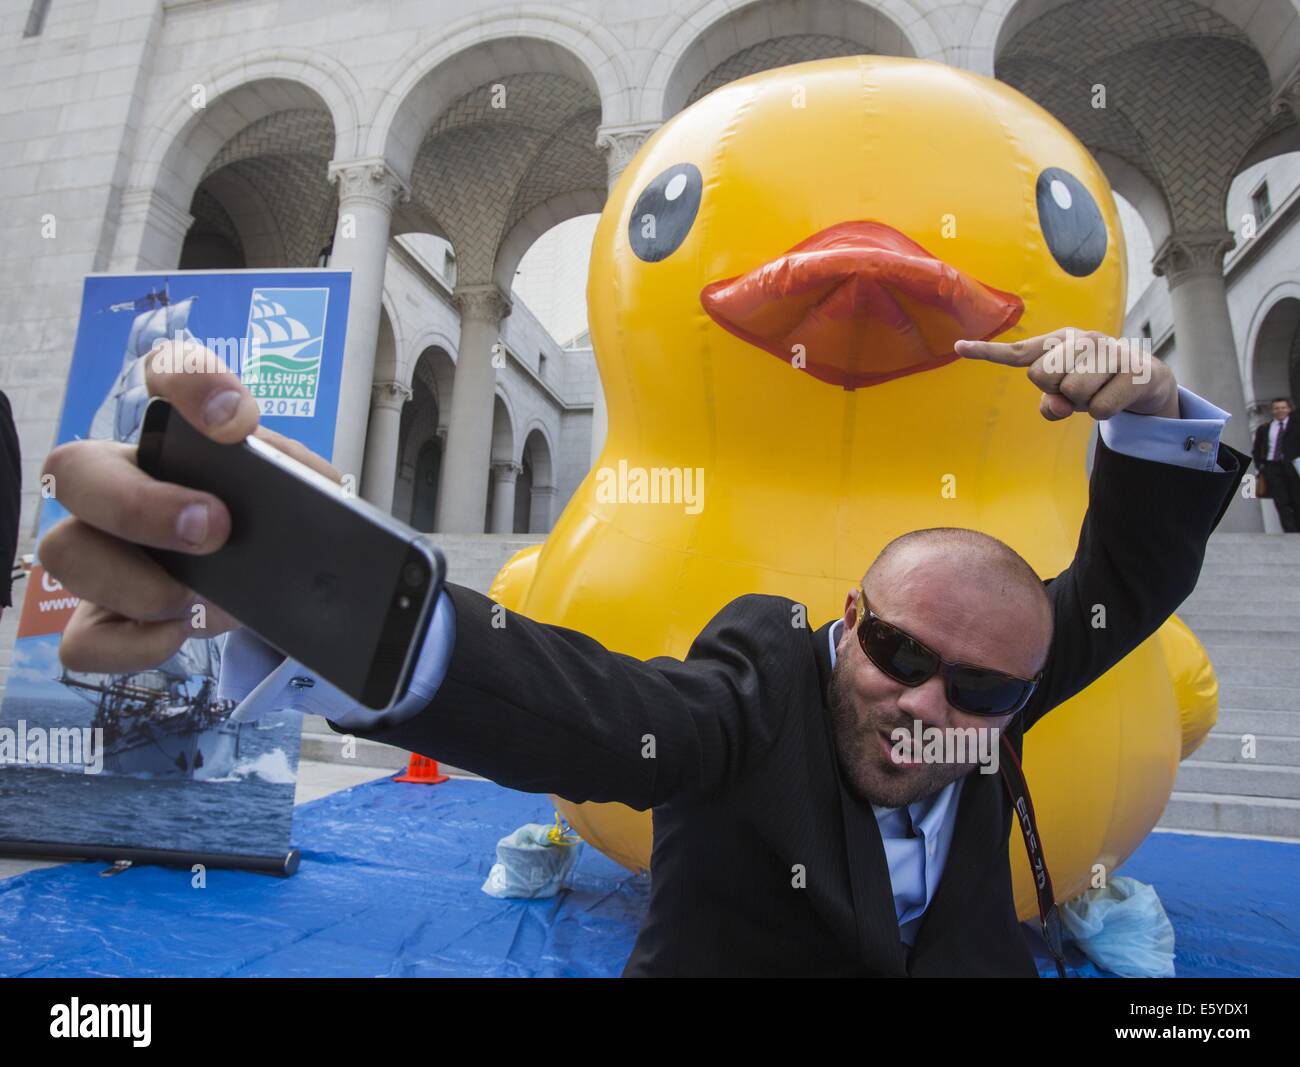 Los Angeles, California, USA. 8th Aug, 2014. Branimir Kvartuc poses for a selfie with a 10-foot-tall rubber ducky ''baby duck'' squatting on the Spring Street steps of Los Angeles City Hall on Friday, Aug. 8, 2014, in Los Angeles. The bright yellow, inflatable ducky is wandering the city in search of its mother, a 60 feet high and dubbed by event organizers as the world's largest rubber ducky as part of a promotional stunt for the Tall Ships Festival taking place Aug. 20-24 at the Port of Los Angeles. Credit:  Ringo Chiu/ZUMA Wire/Alamy Live News Stock Photo